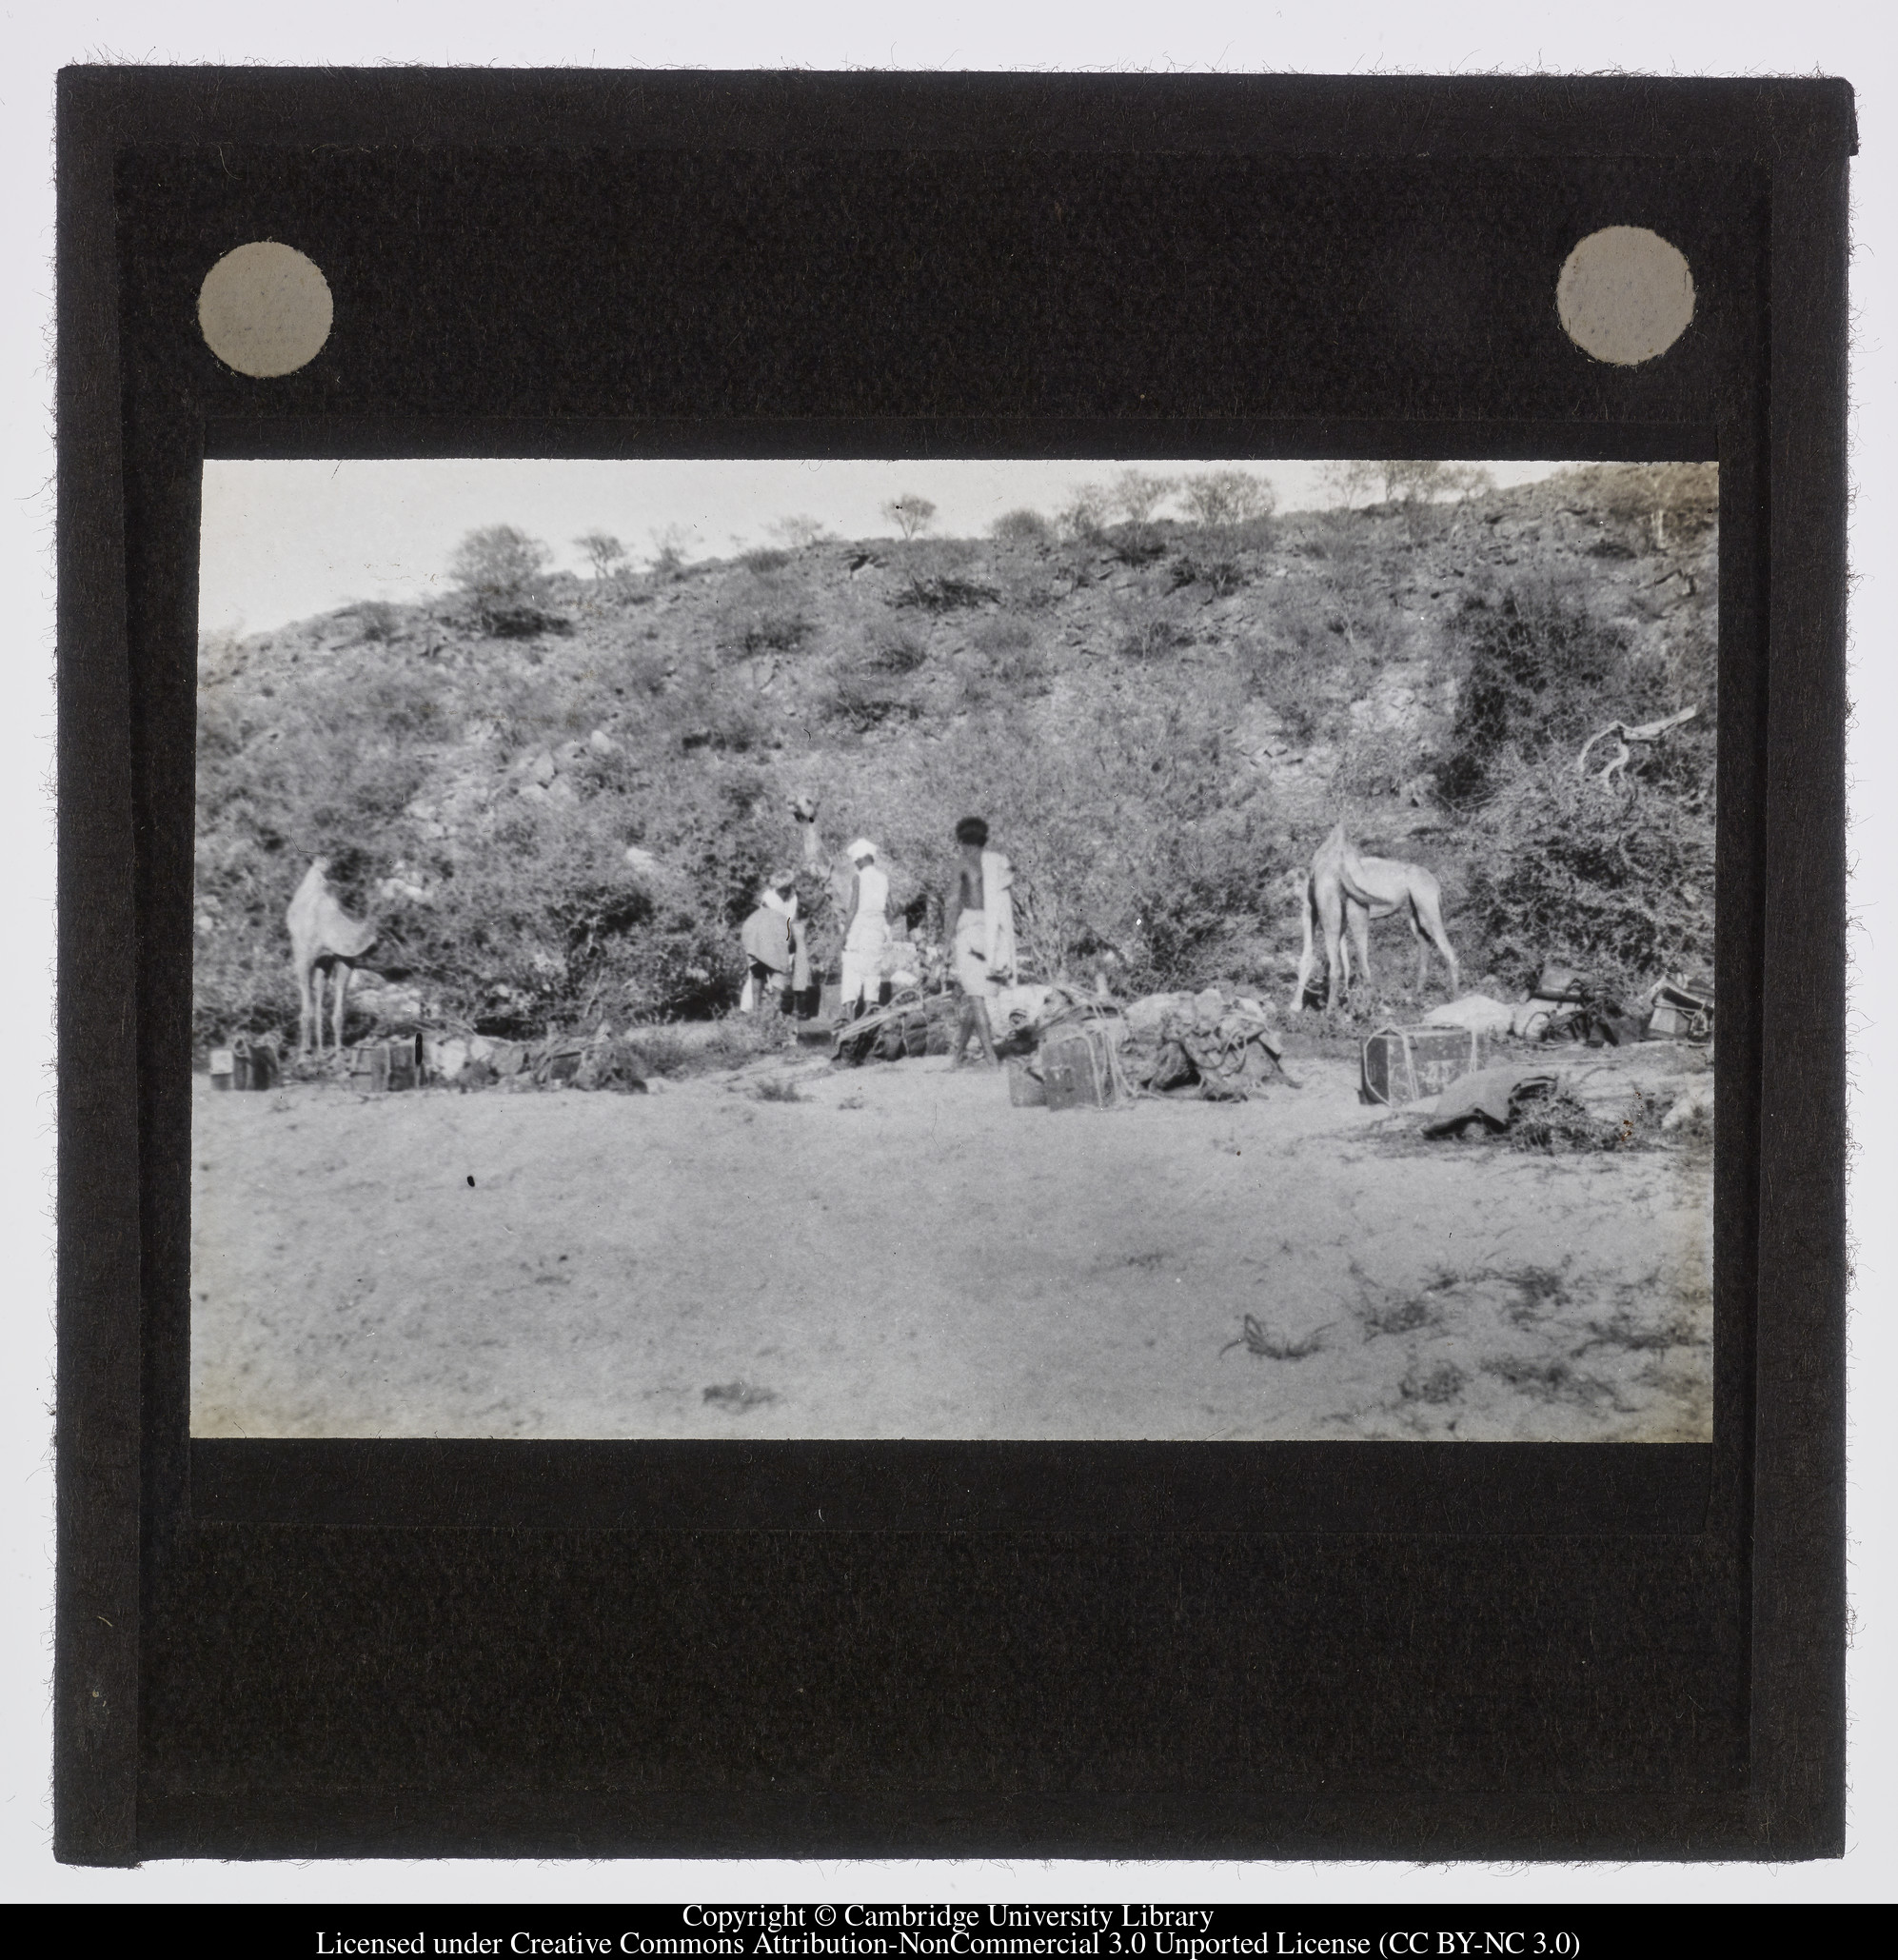 [Group with camels resting in the shade], 1924 - 1945